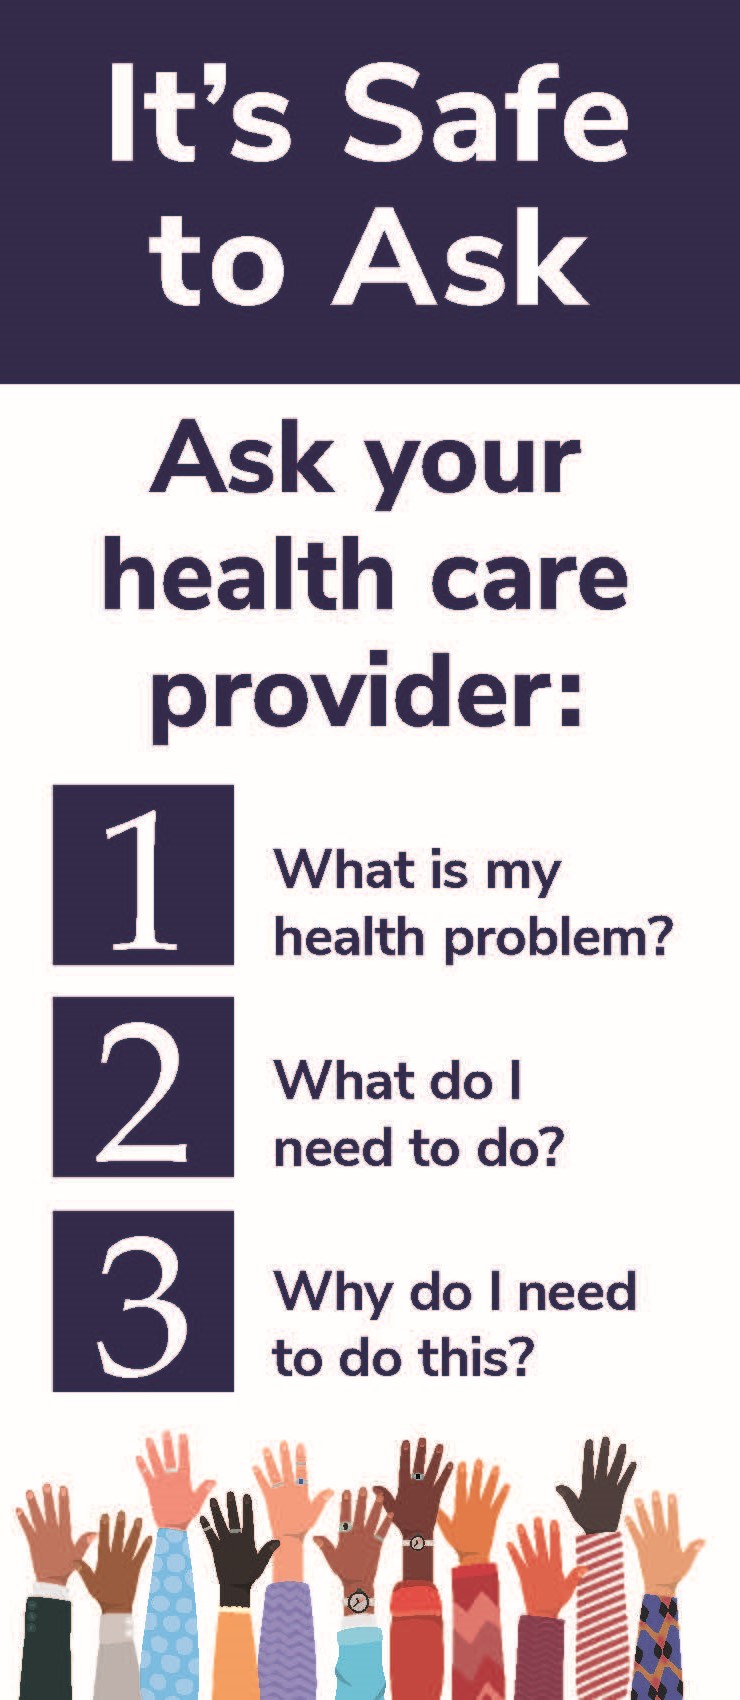 List of questions safe to ask your health care provider 1: what is my health problem? 2: what do i need to do? 3: why do i need to do this? (c) Cancer Care Manitoba